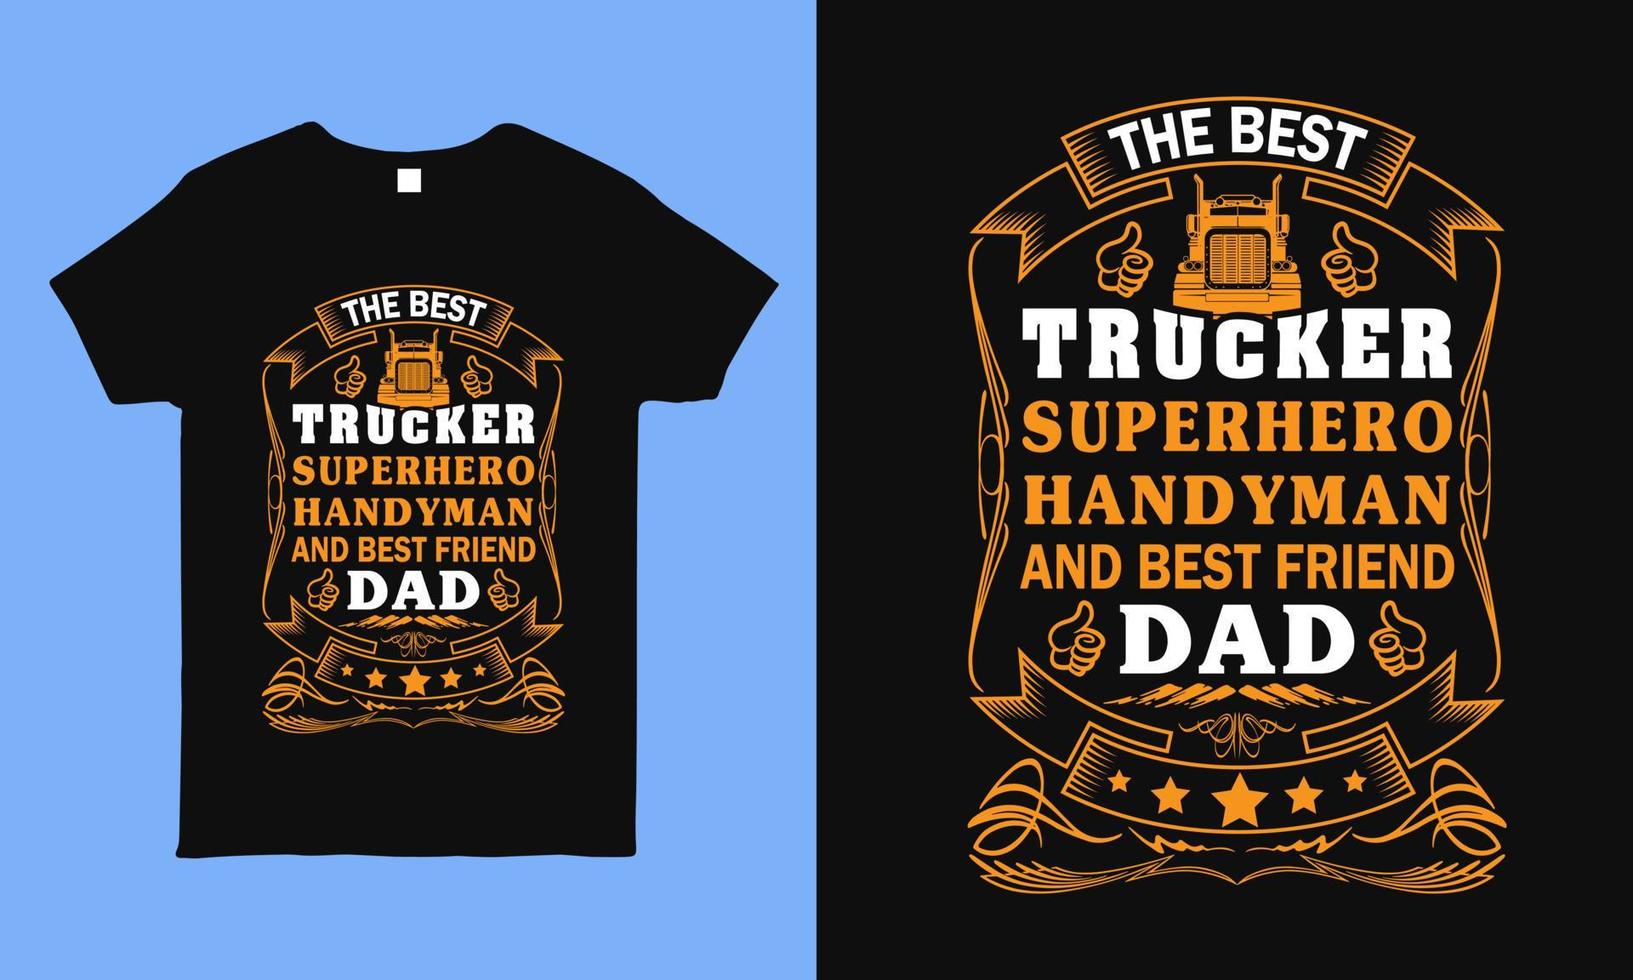 The best trucker dad saying t shirt  design for truck driver father. vector